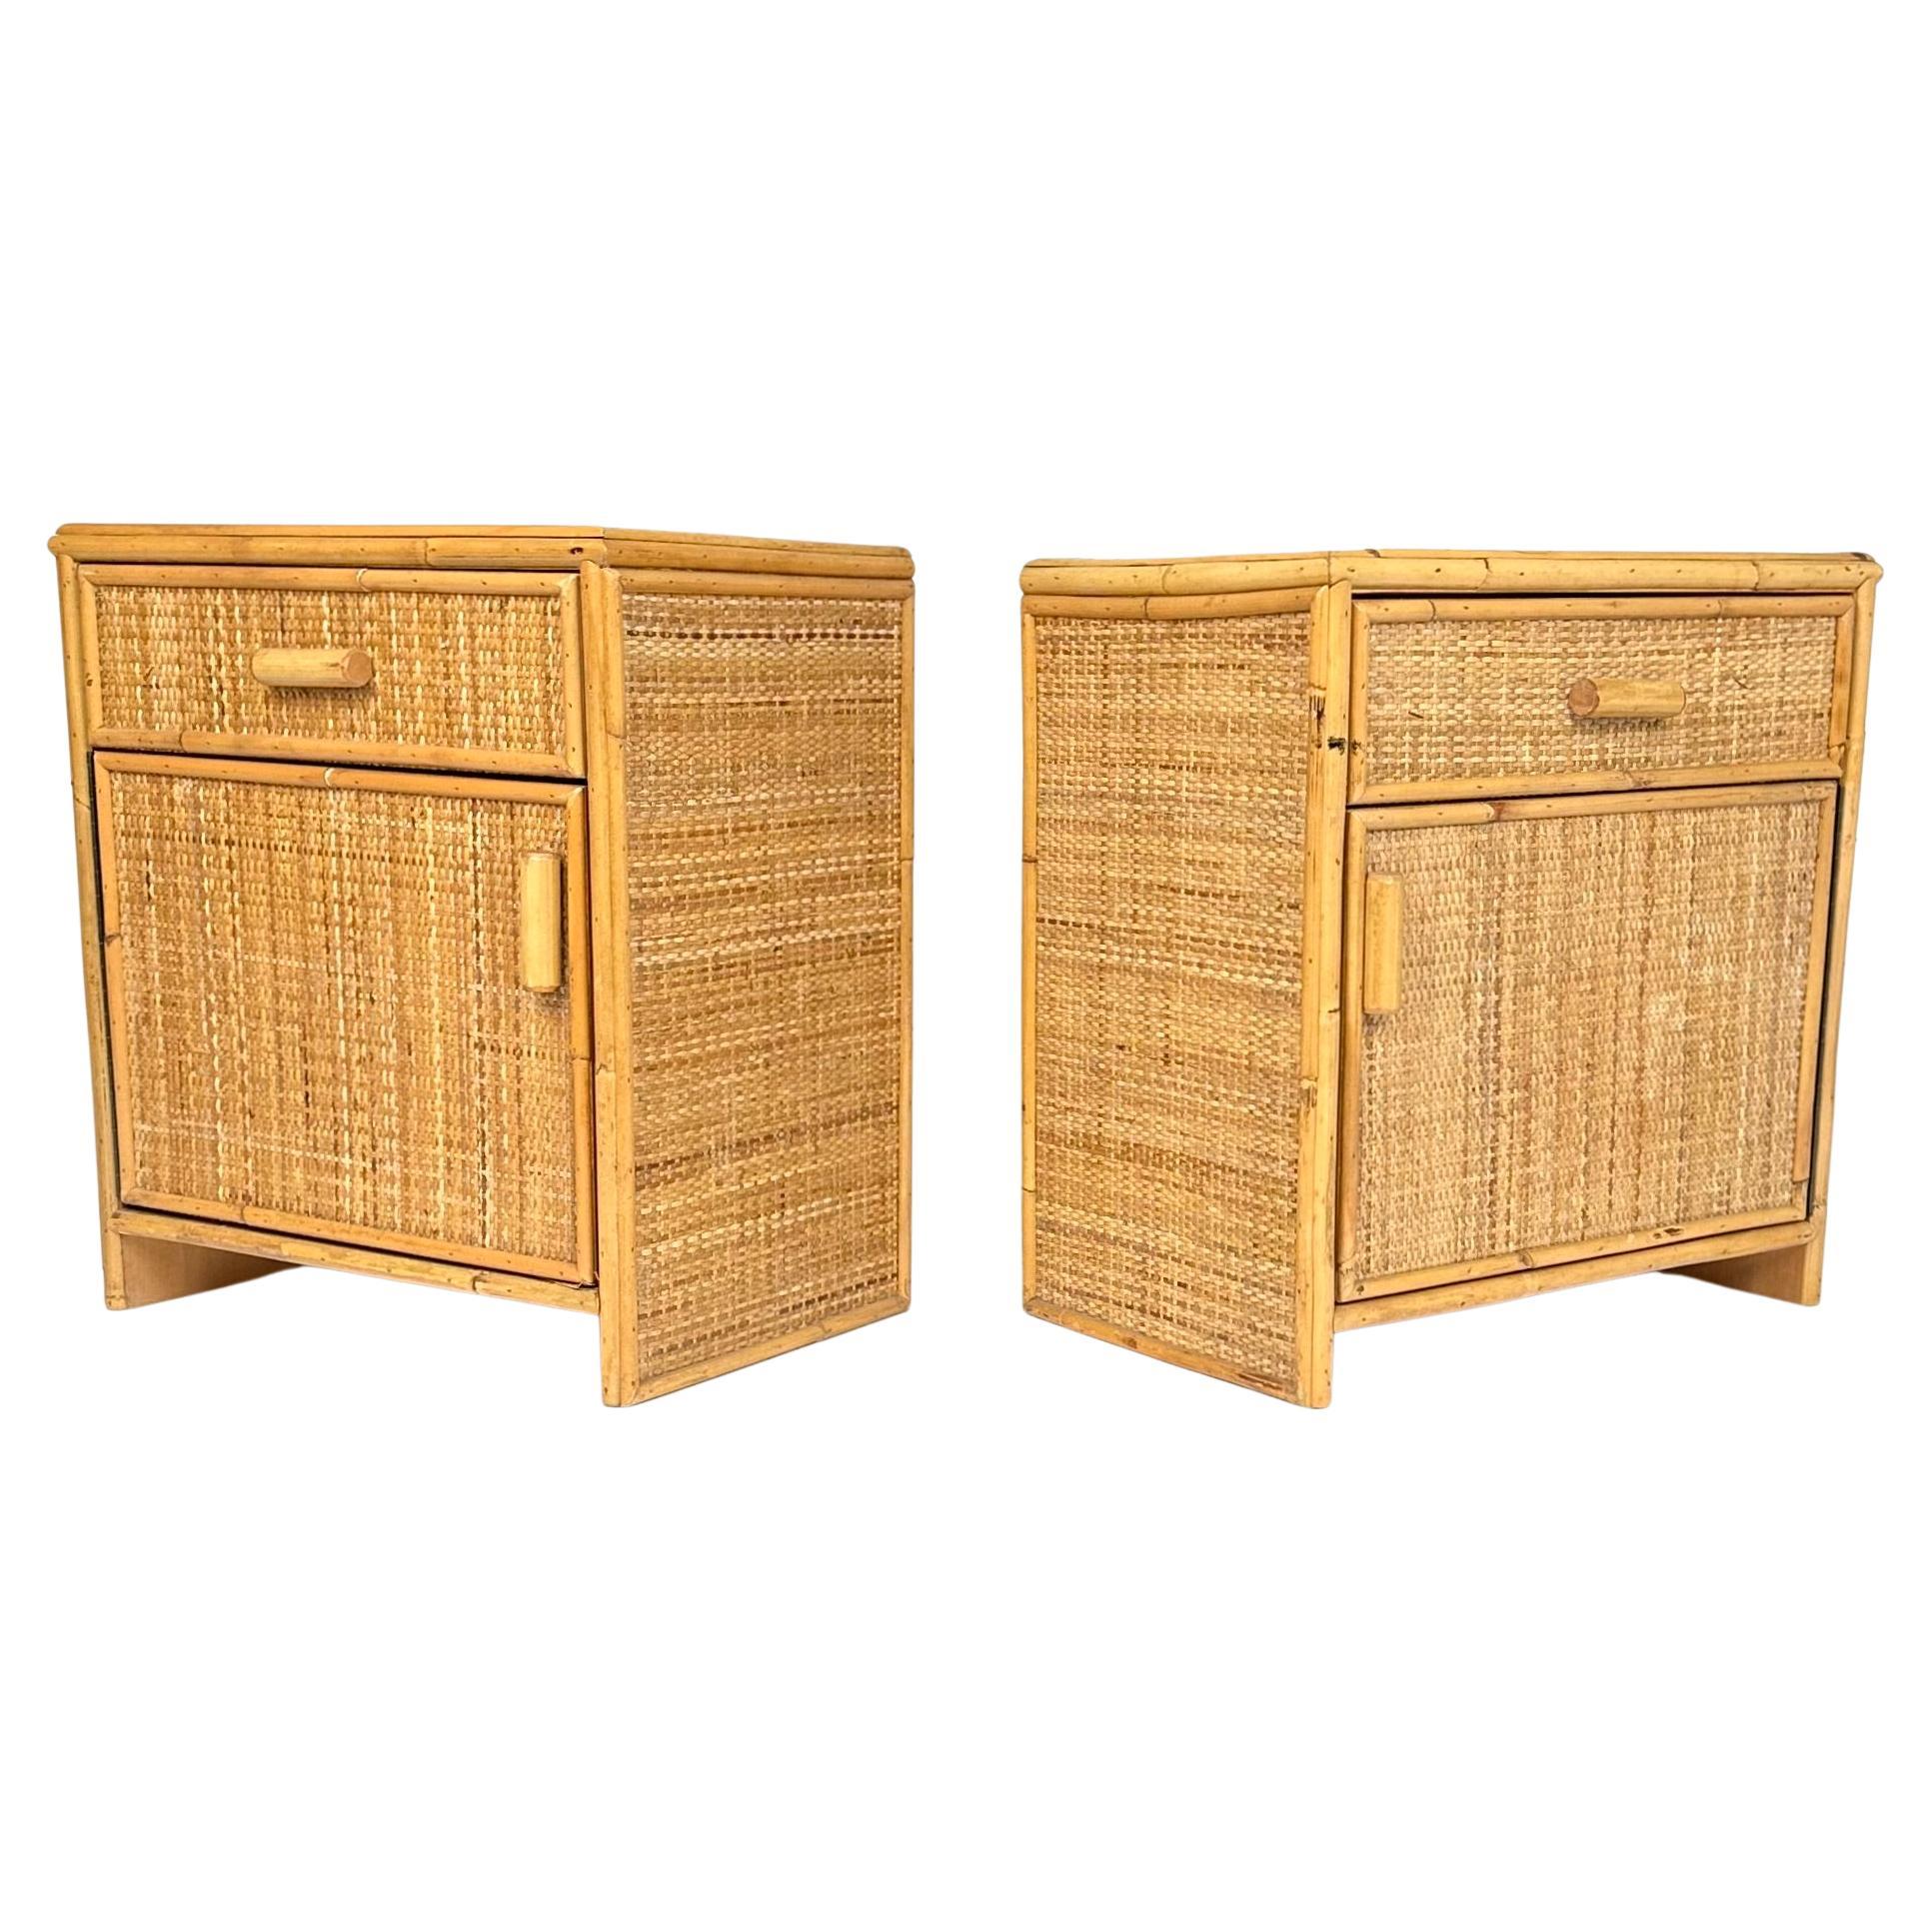 Italian Midcentury Pair of Bedside Tables Nightstands in Bamboo & Rattan, Italy 1970s For Sale